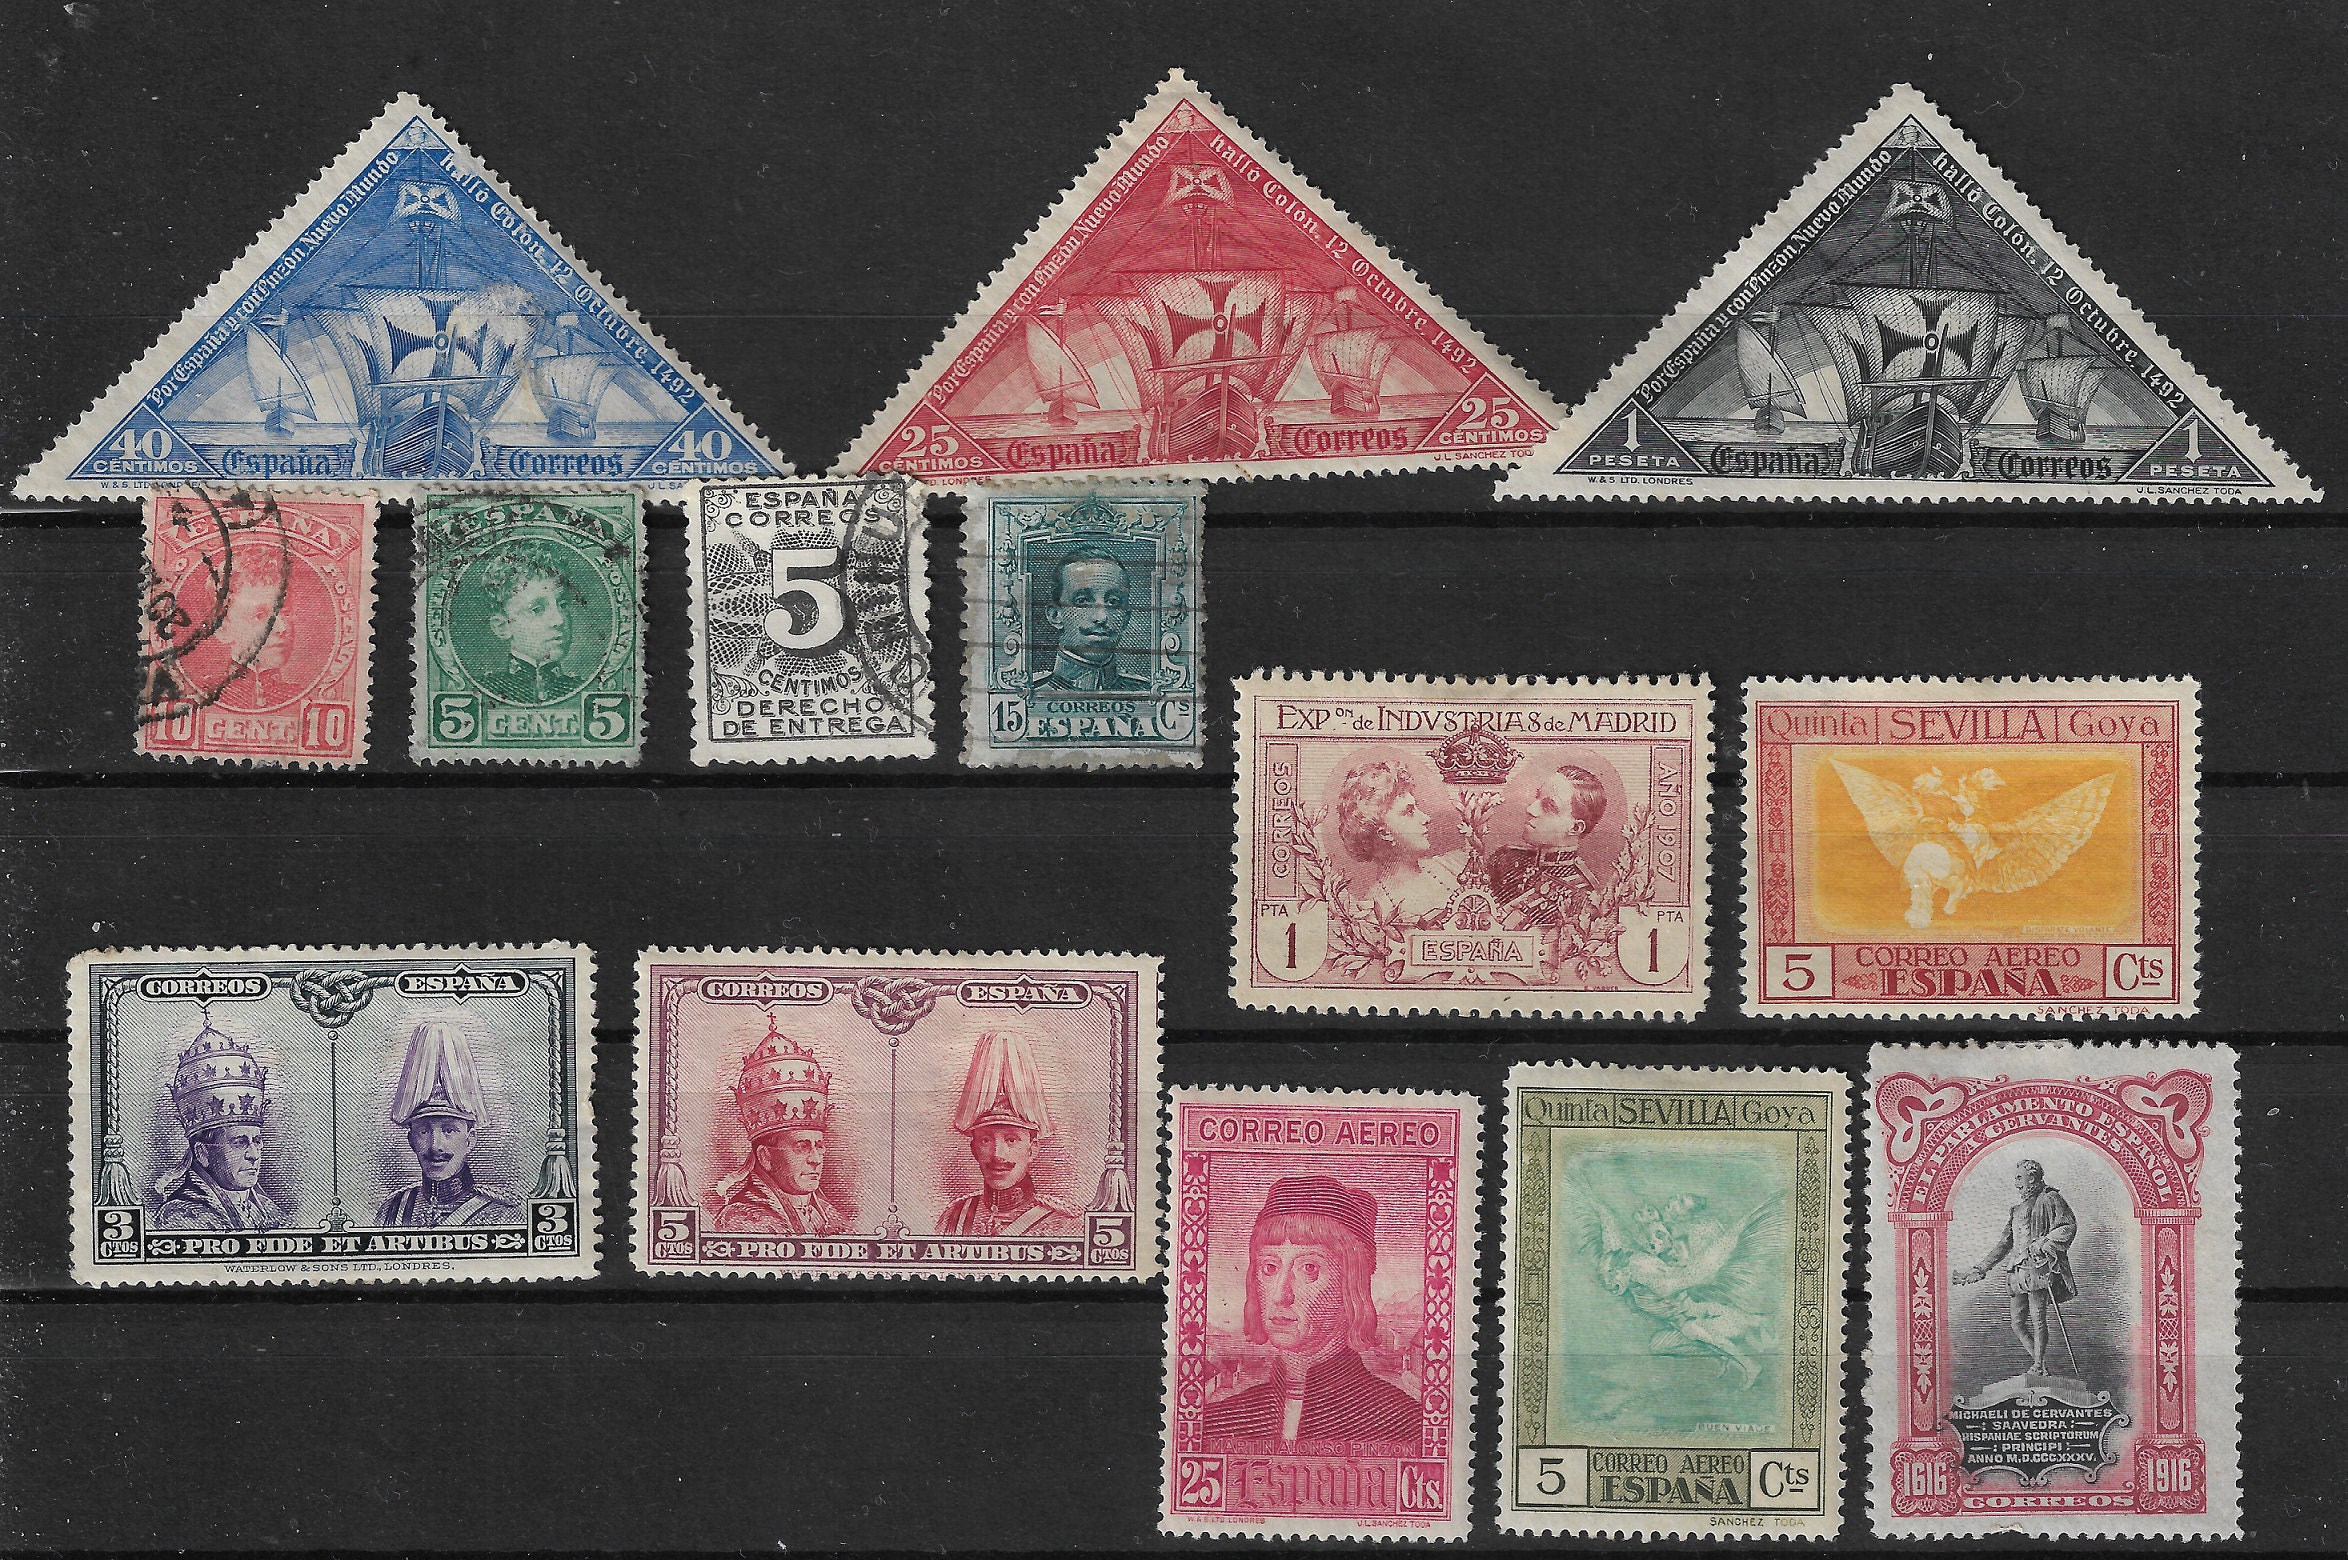 Vintage Australian Postage Stamps Used With Post Marks for Art